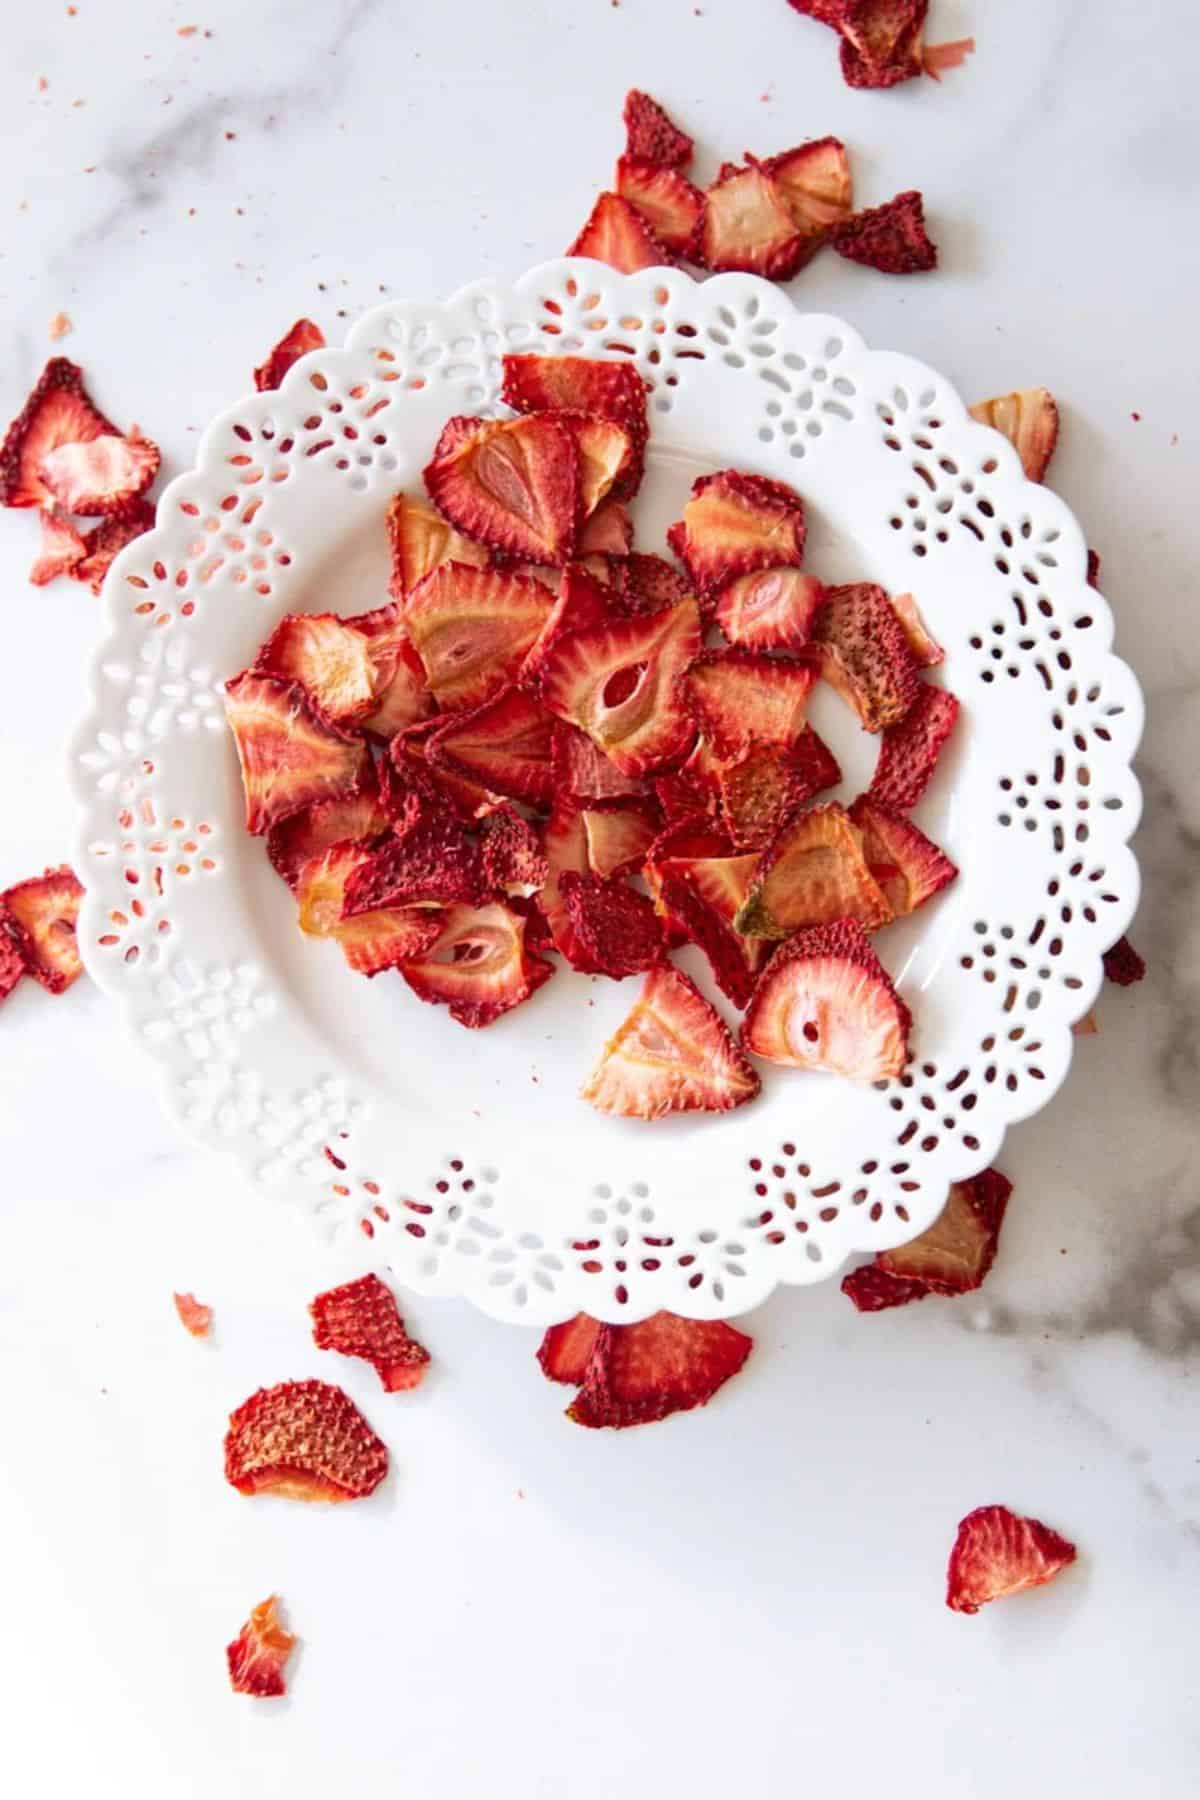 Dehydrated strawberries on a fancy plate.